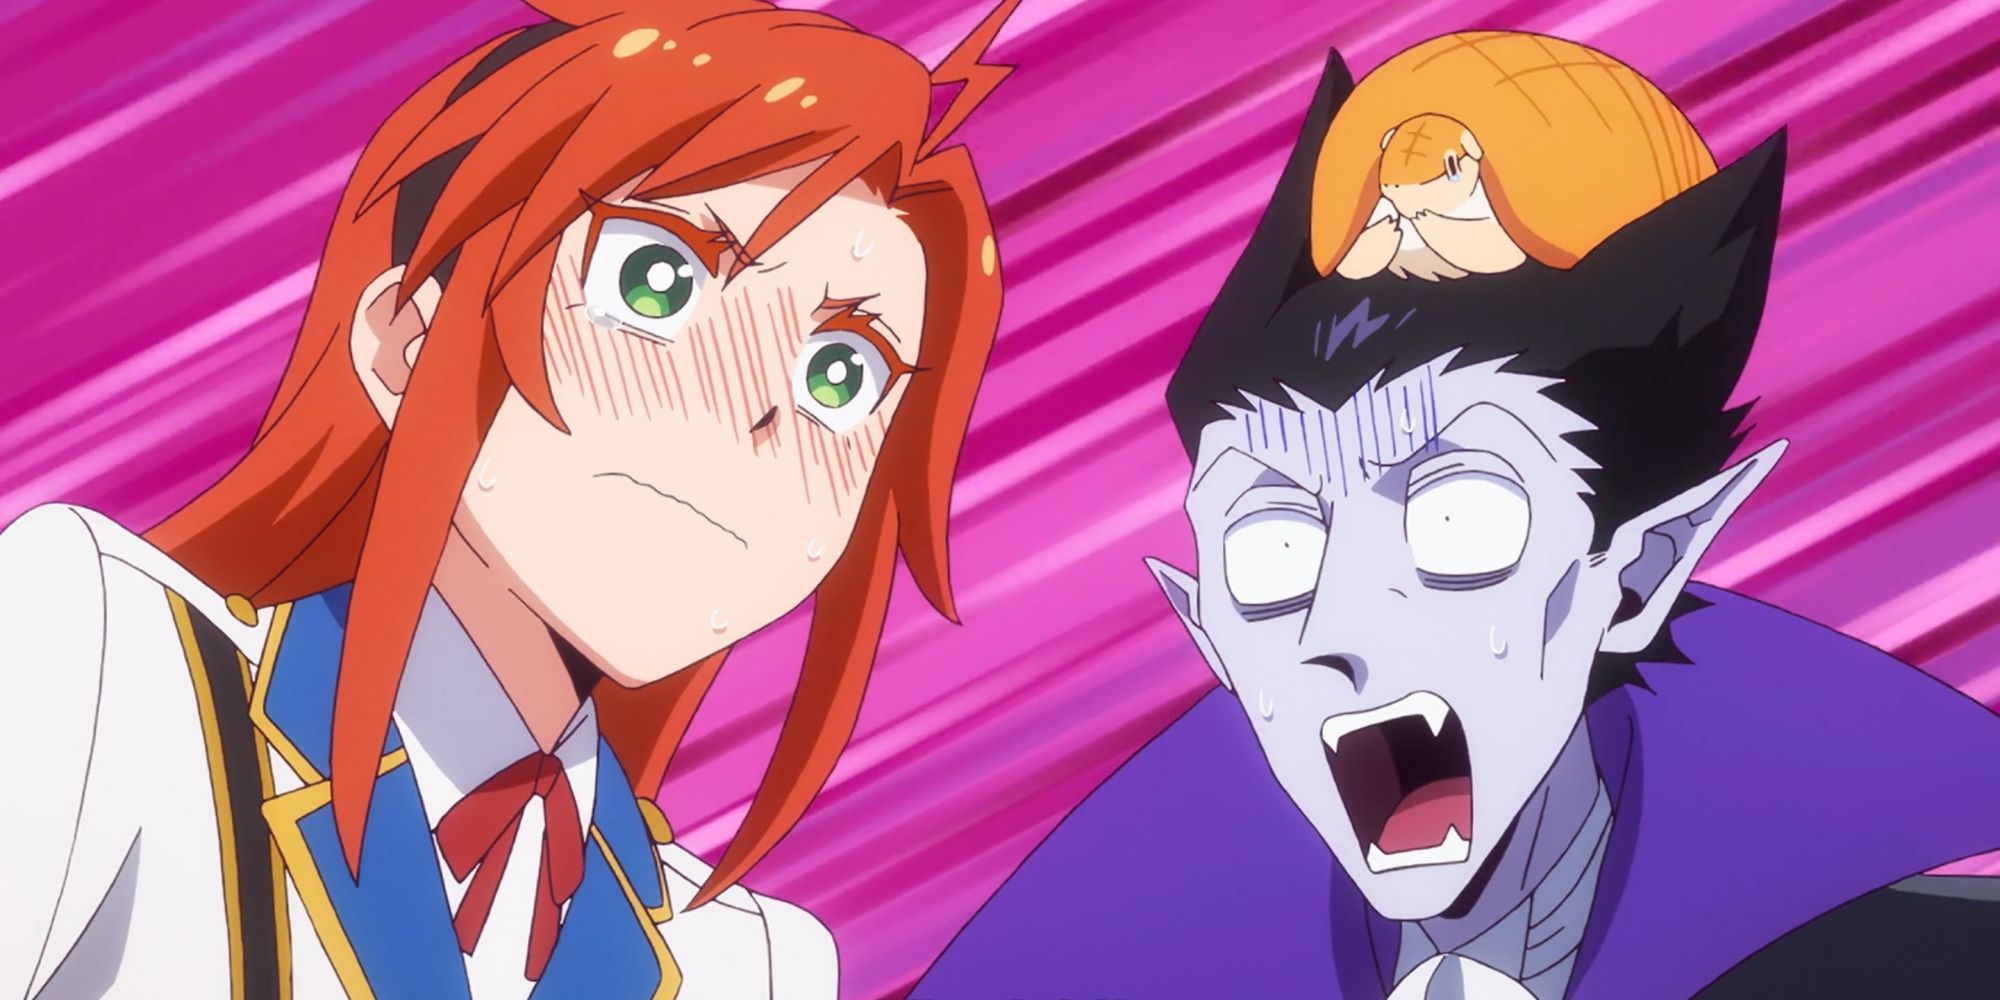 Draluc and John are shocked at an embarrassed Hinaichi in The Vampire Dies in No Time.